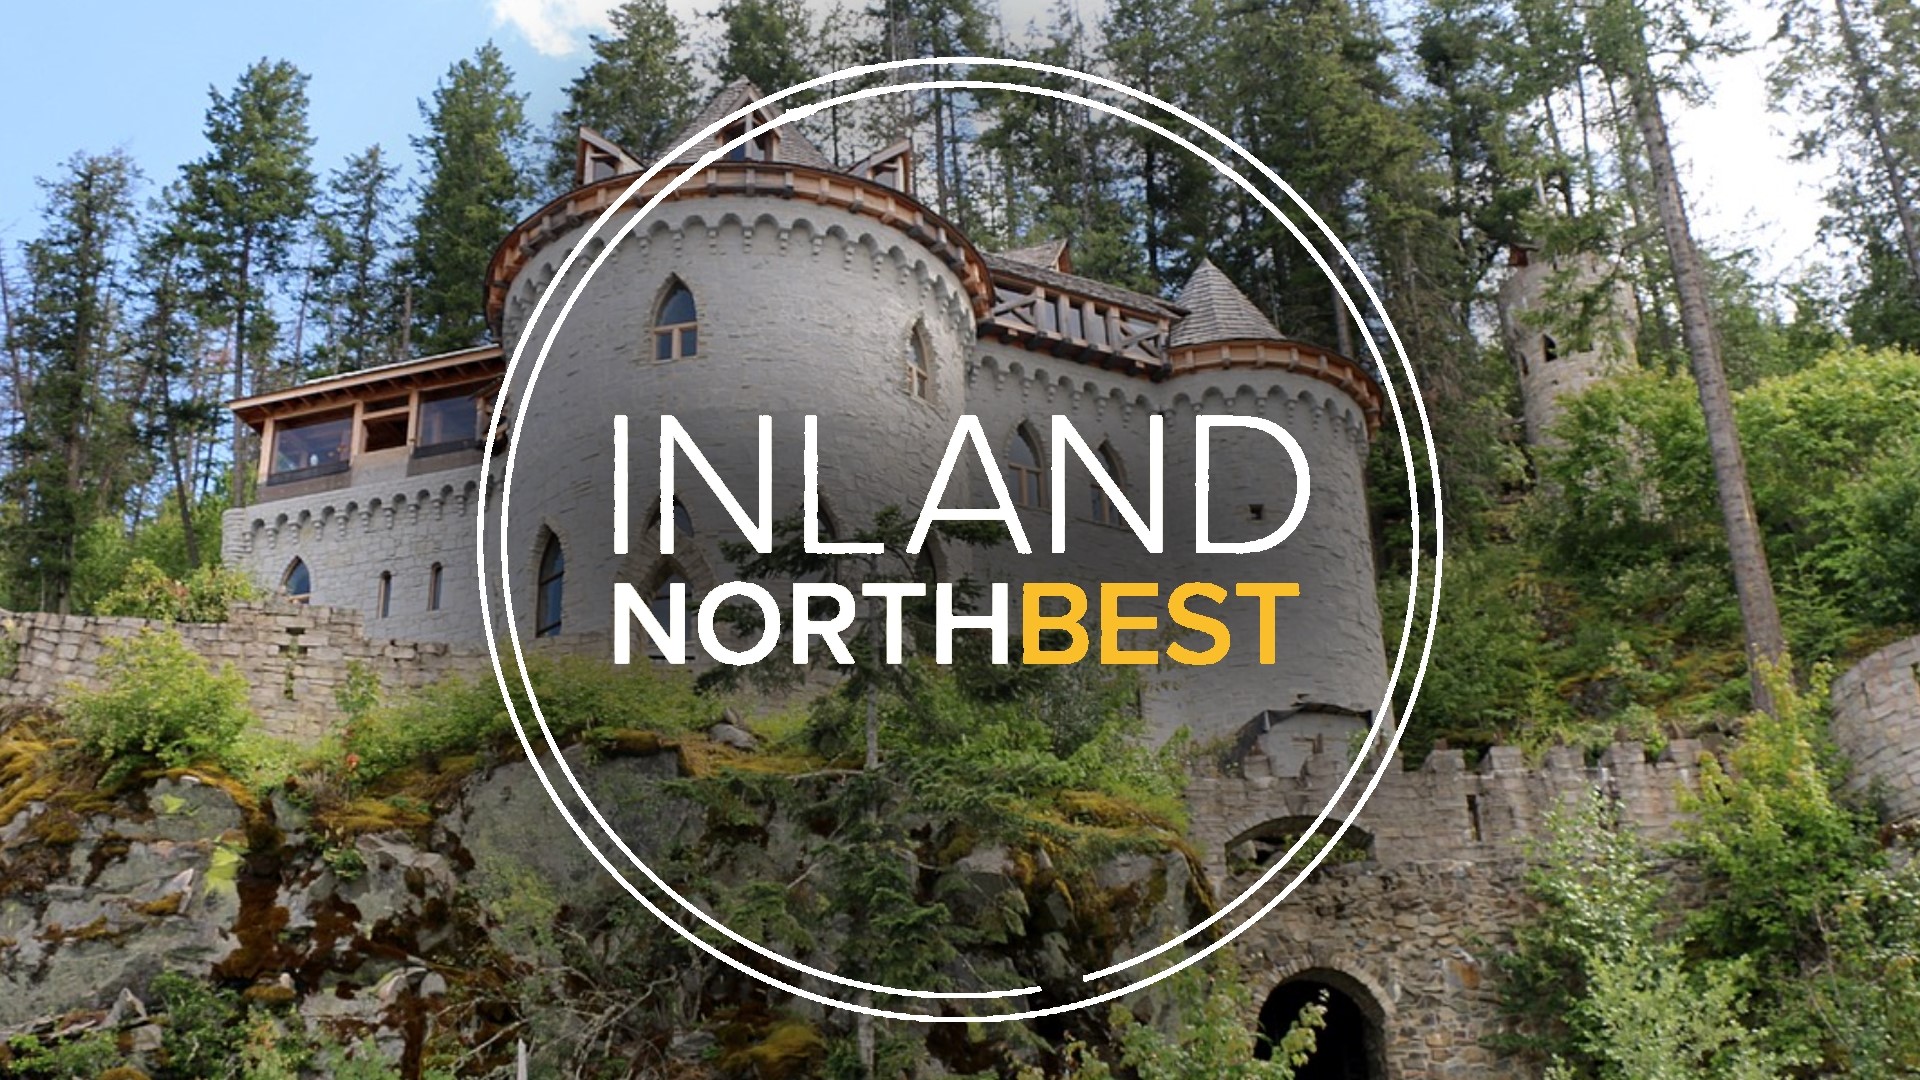 A castle in north Idaho, a record swim, an award-winning shop, and a secret mural. These are some of our most popular Inland Northbest stories.